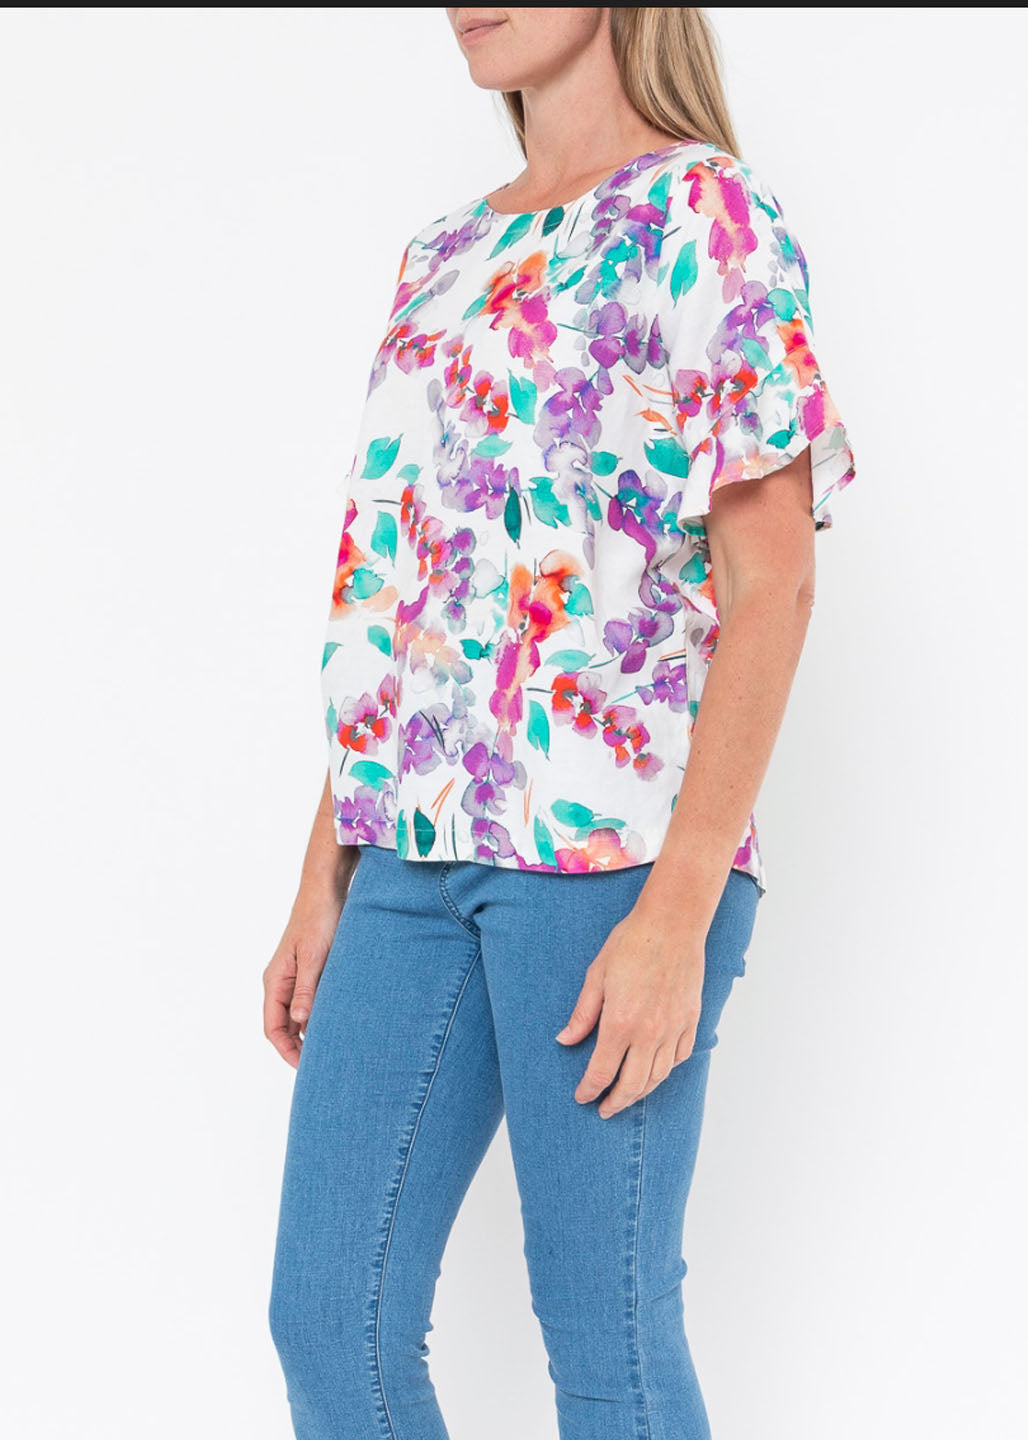 JUMP PAINTERLY FLORAL TOP